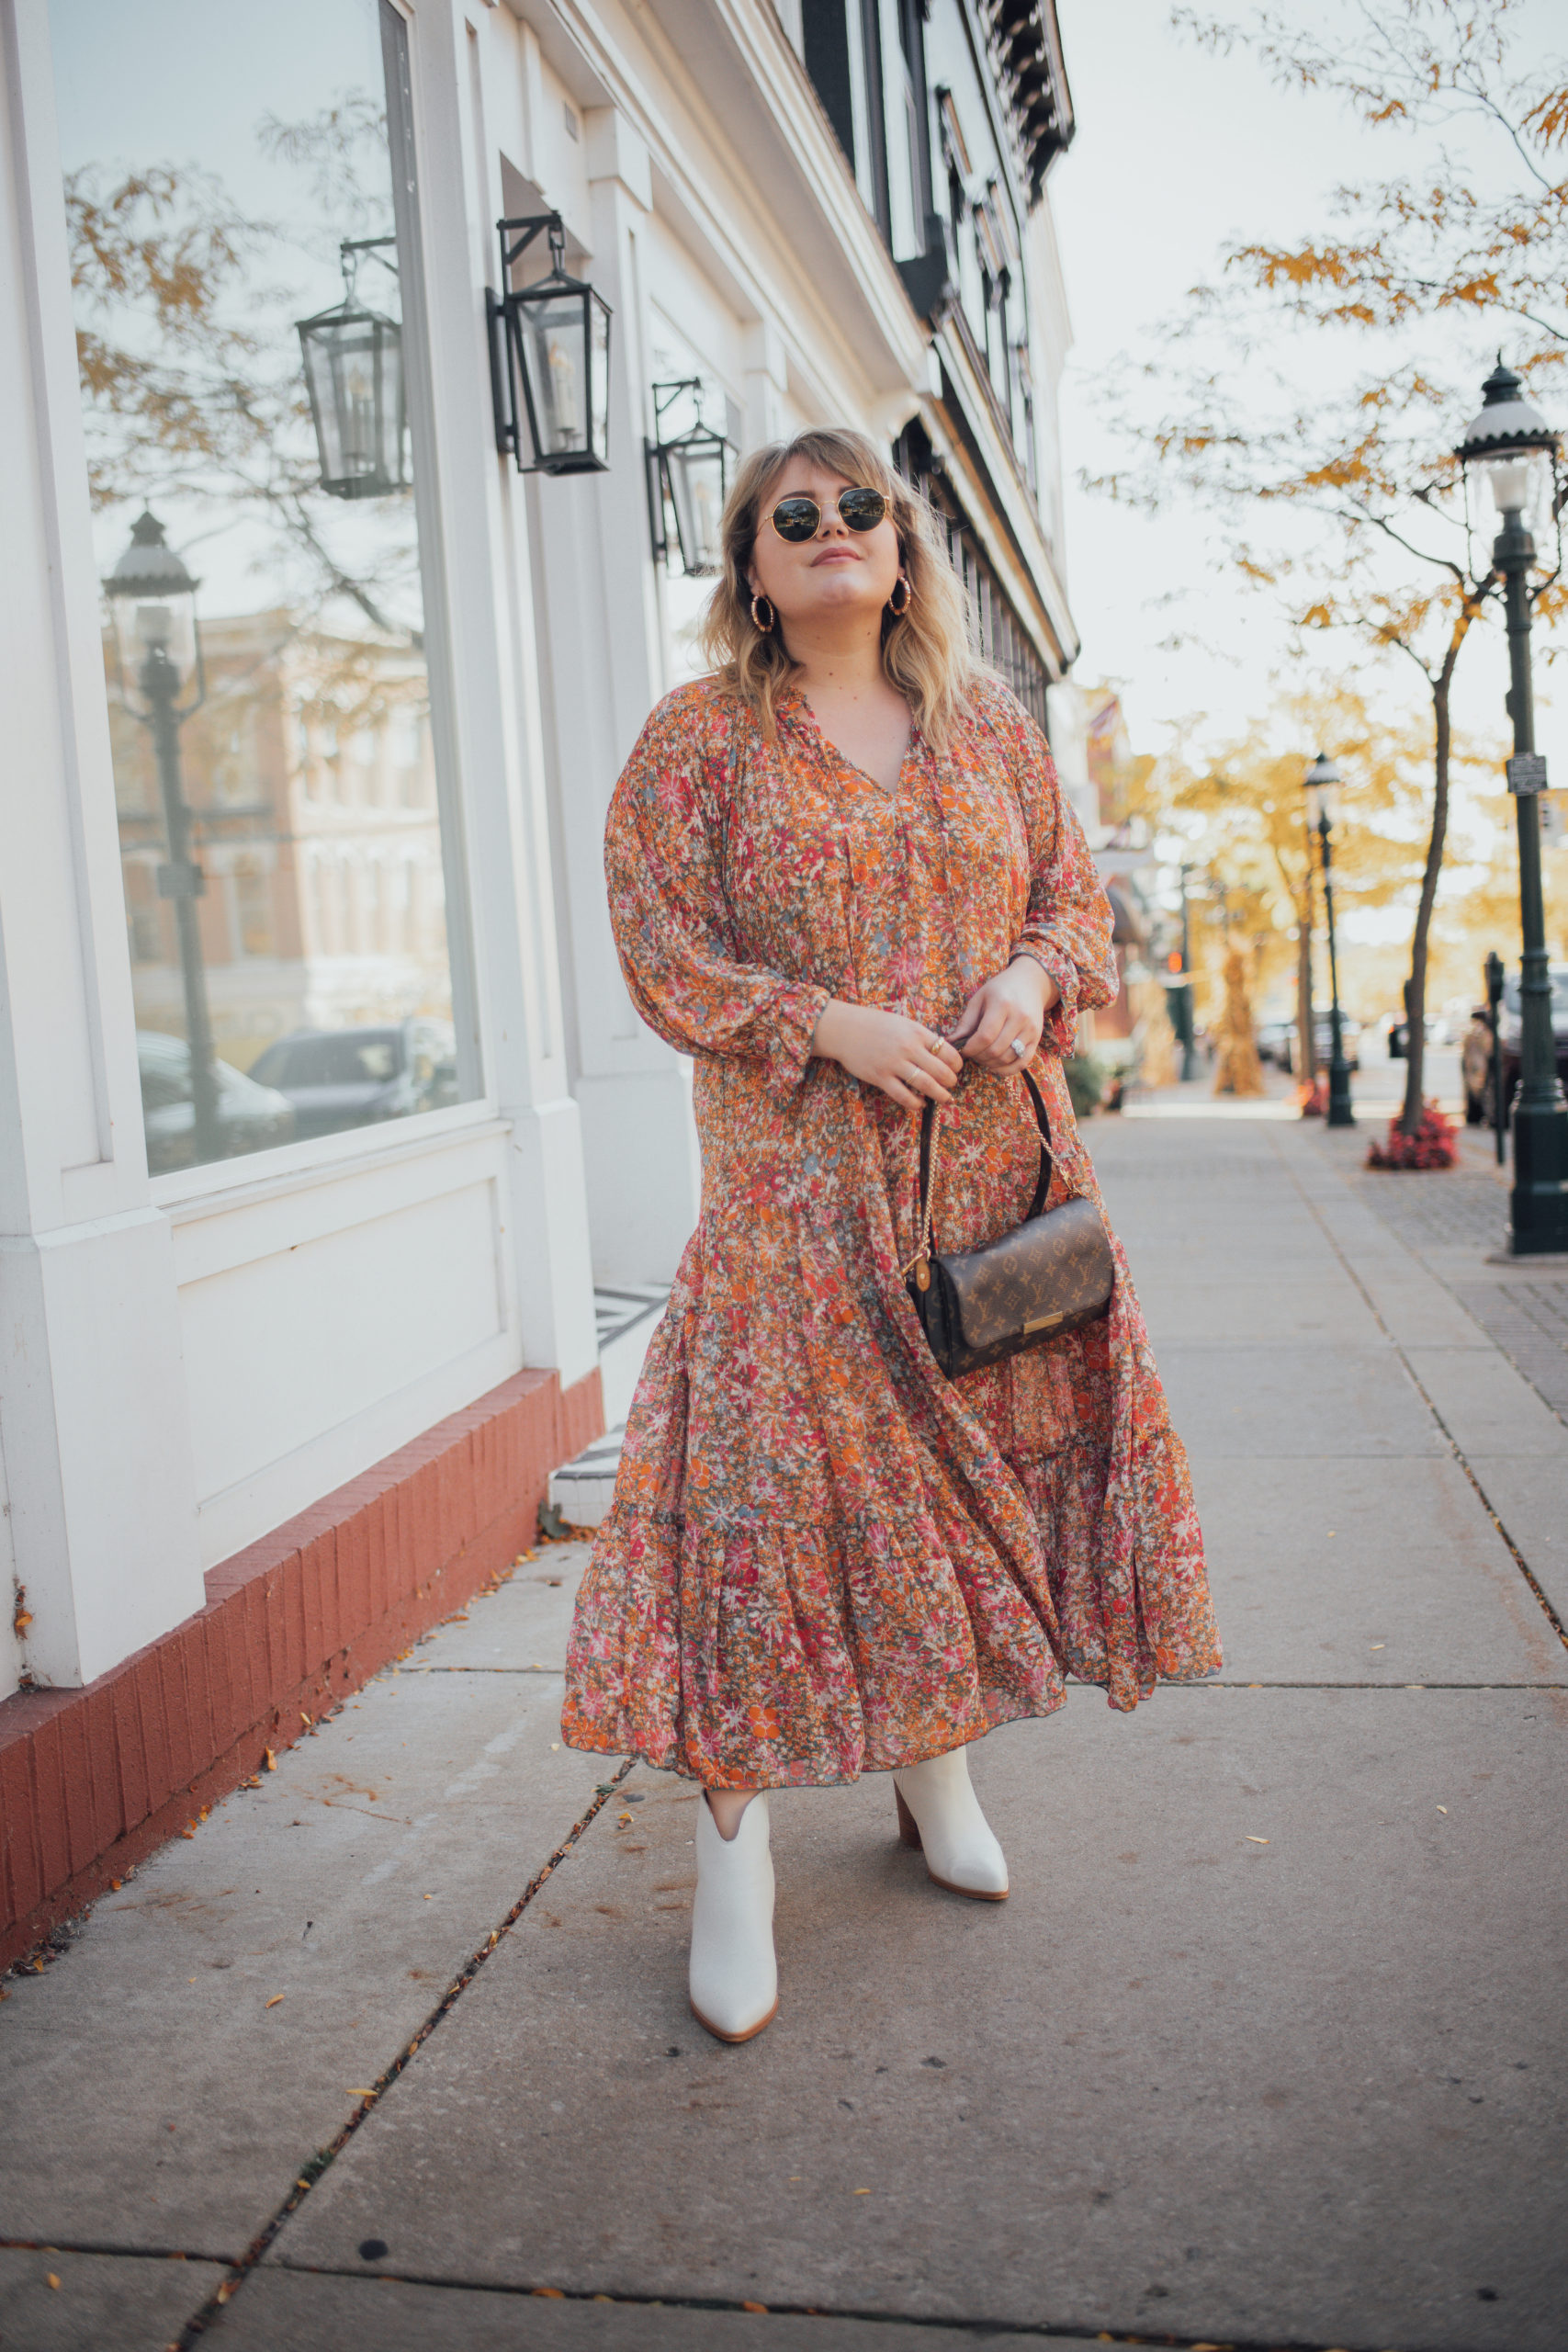 Sharing a fall boho dress from Free People, the Feeling Groovy Maxi dress comes in XS-XL but runs and fits plus sizes.